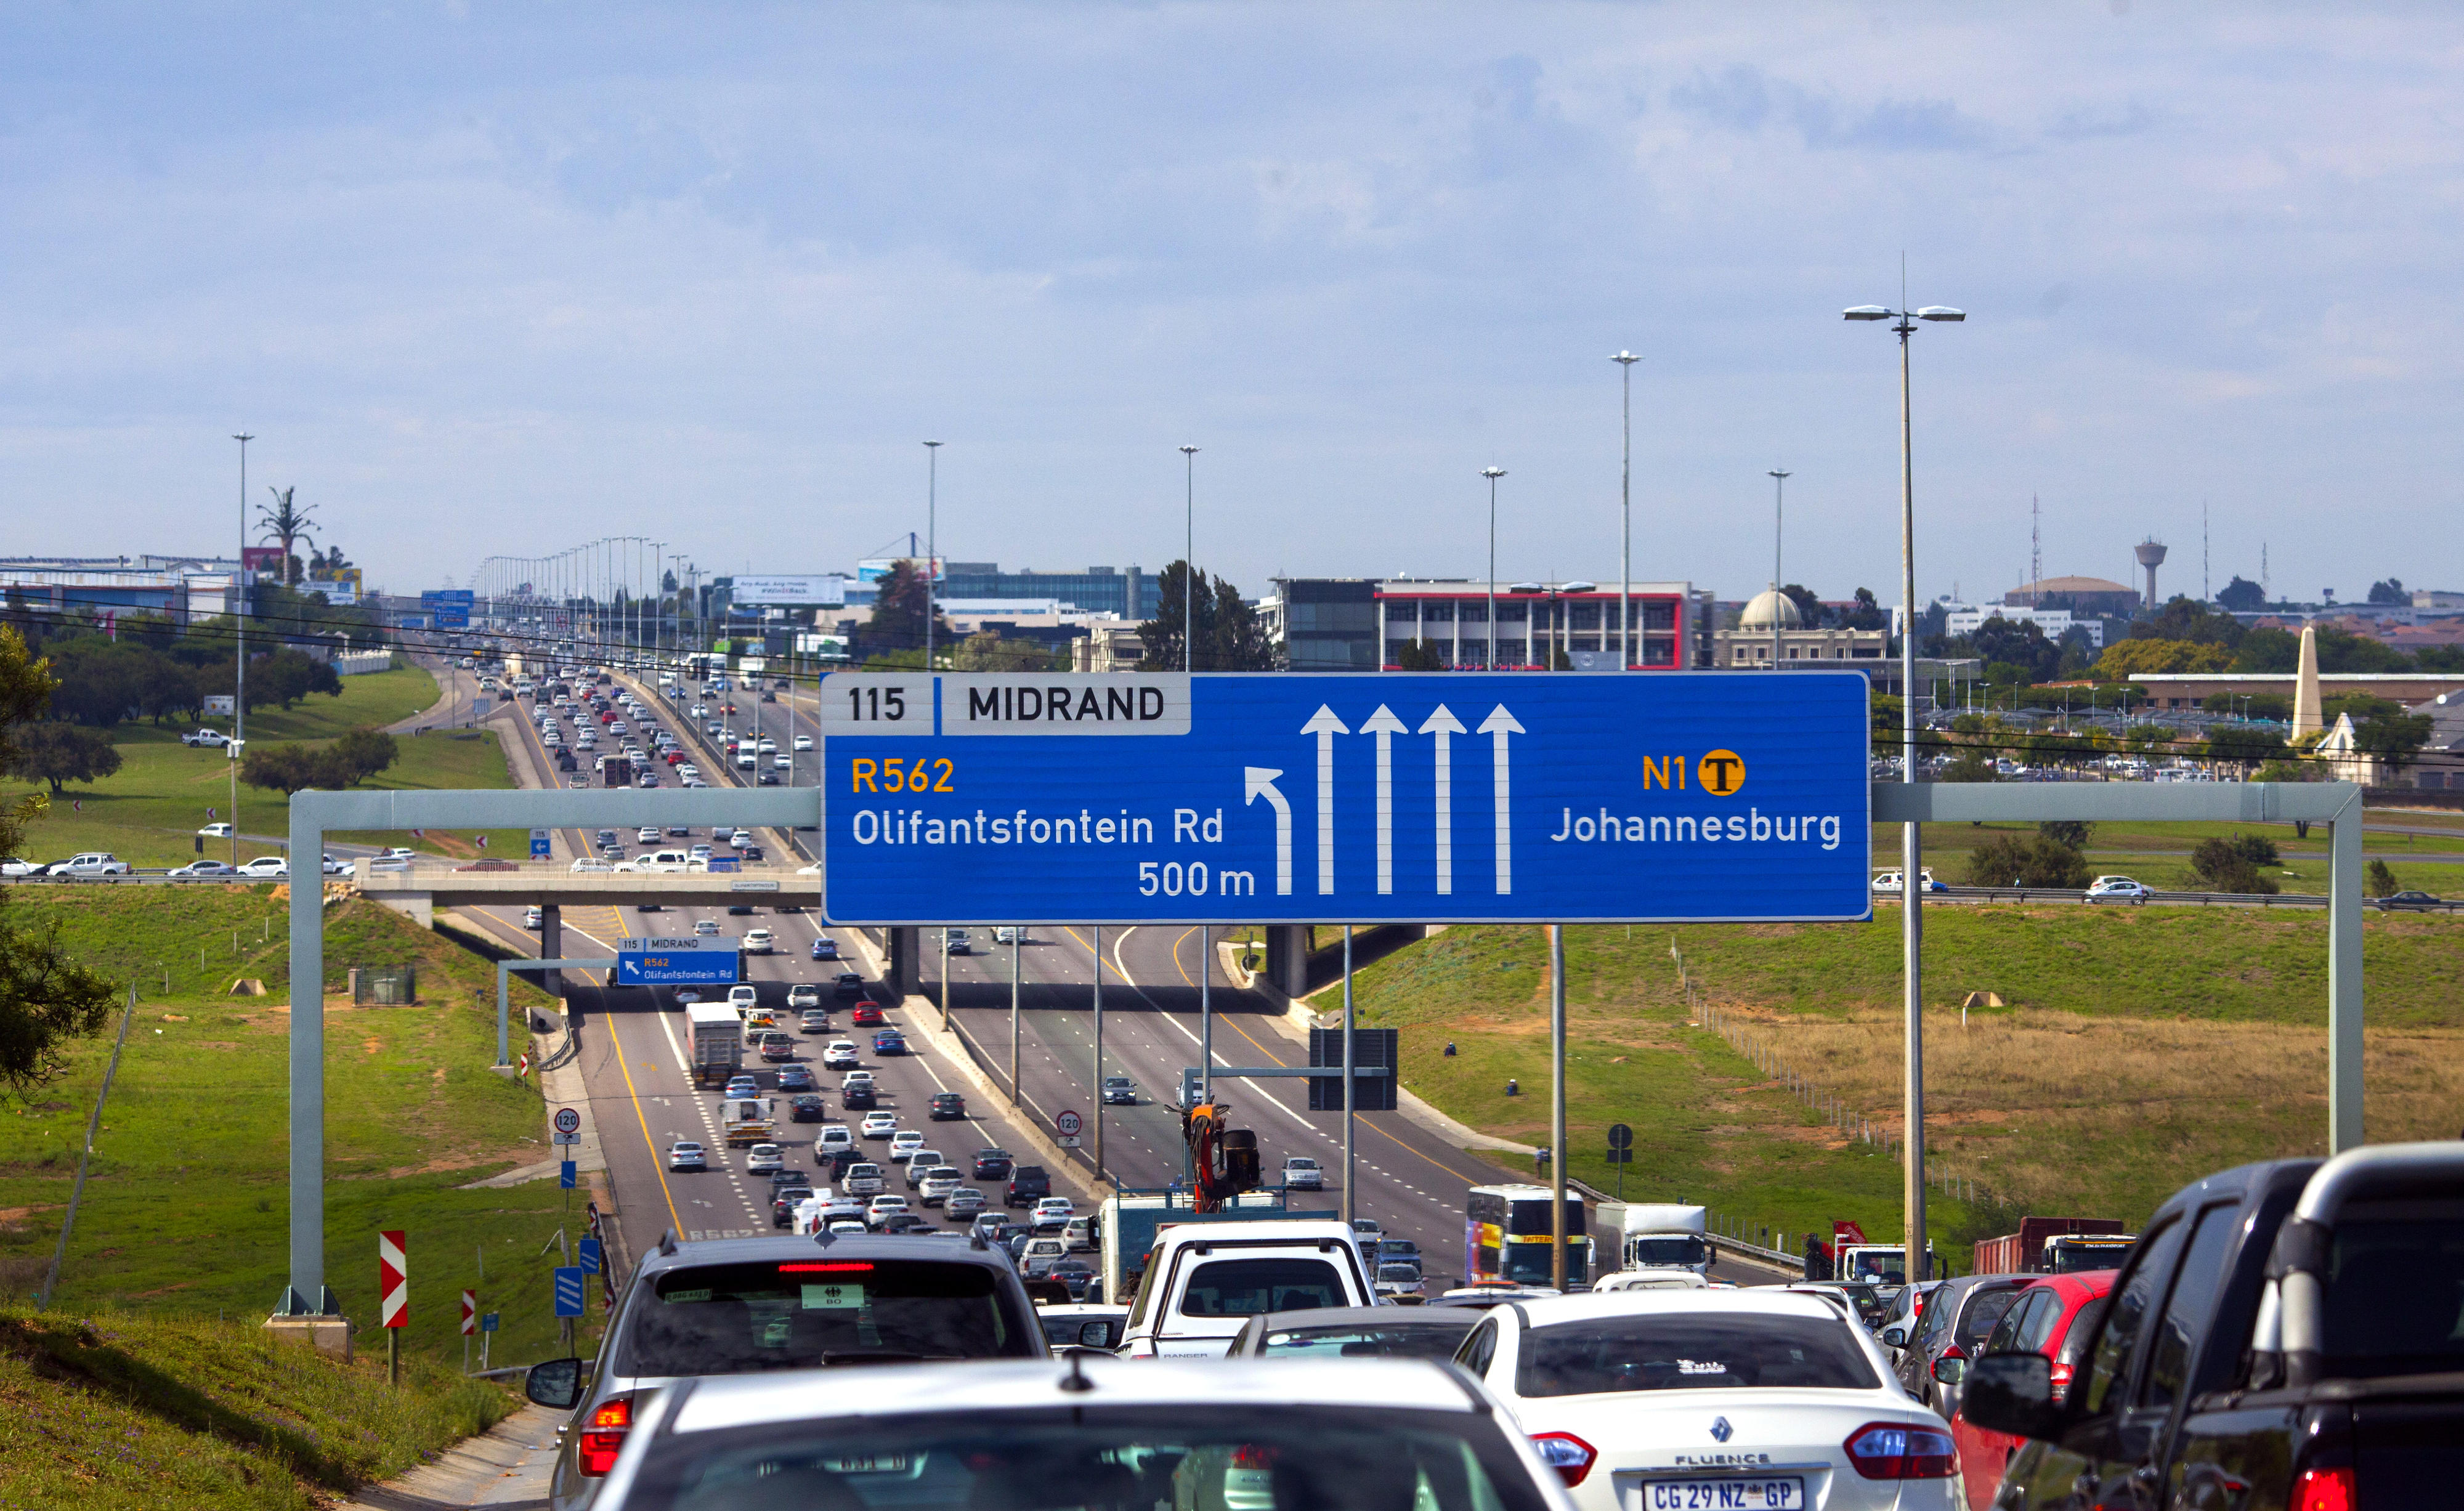 Traffic on the N1 between Pretoria and Johannesburg in South Africa